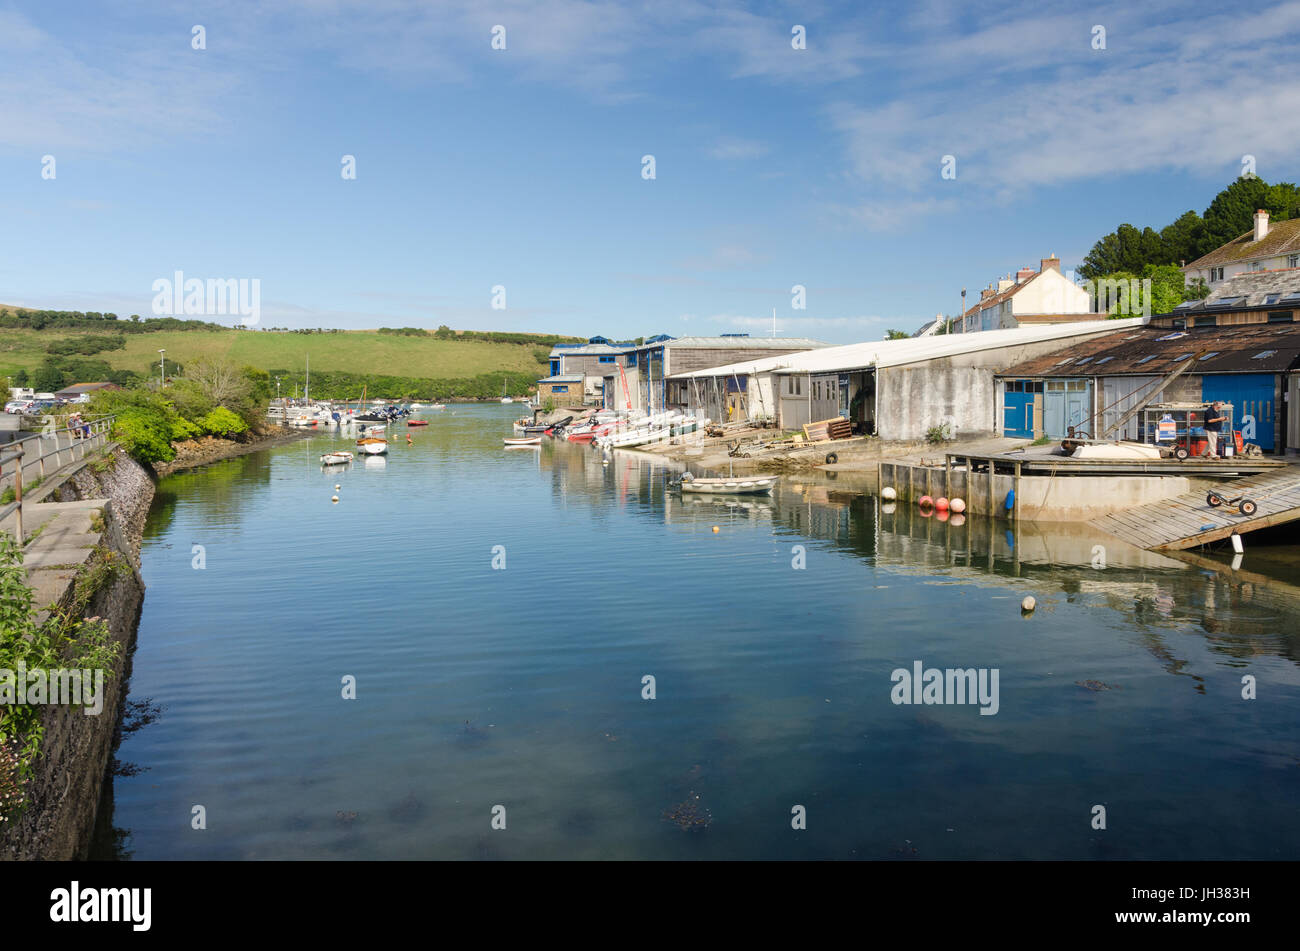 Boatyards on the waters edge at Shadycombe in Salcombe, South Hams, Devon Stock Photo